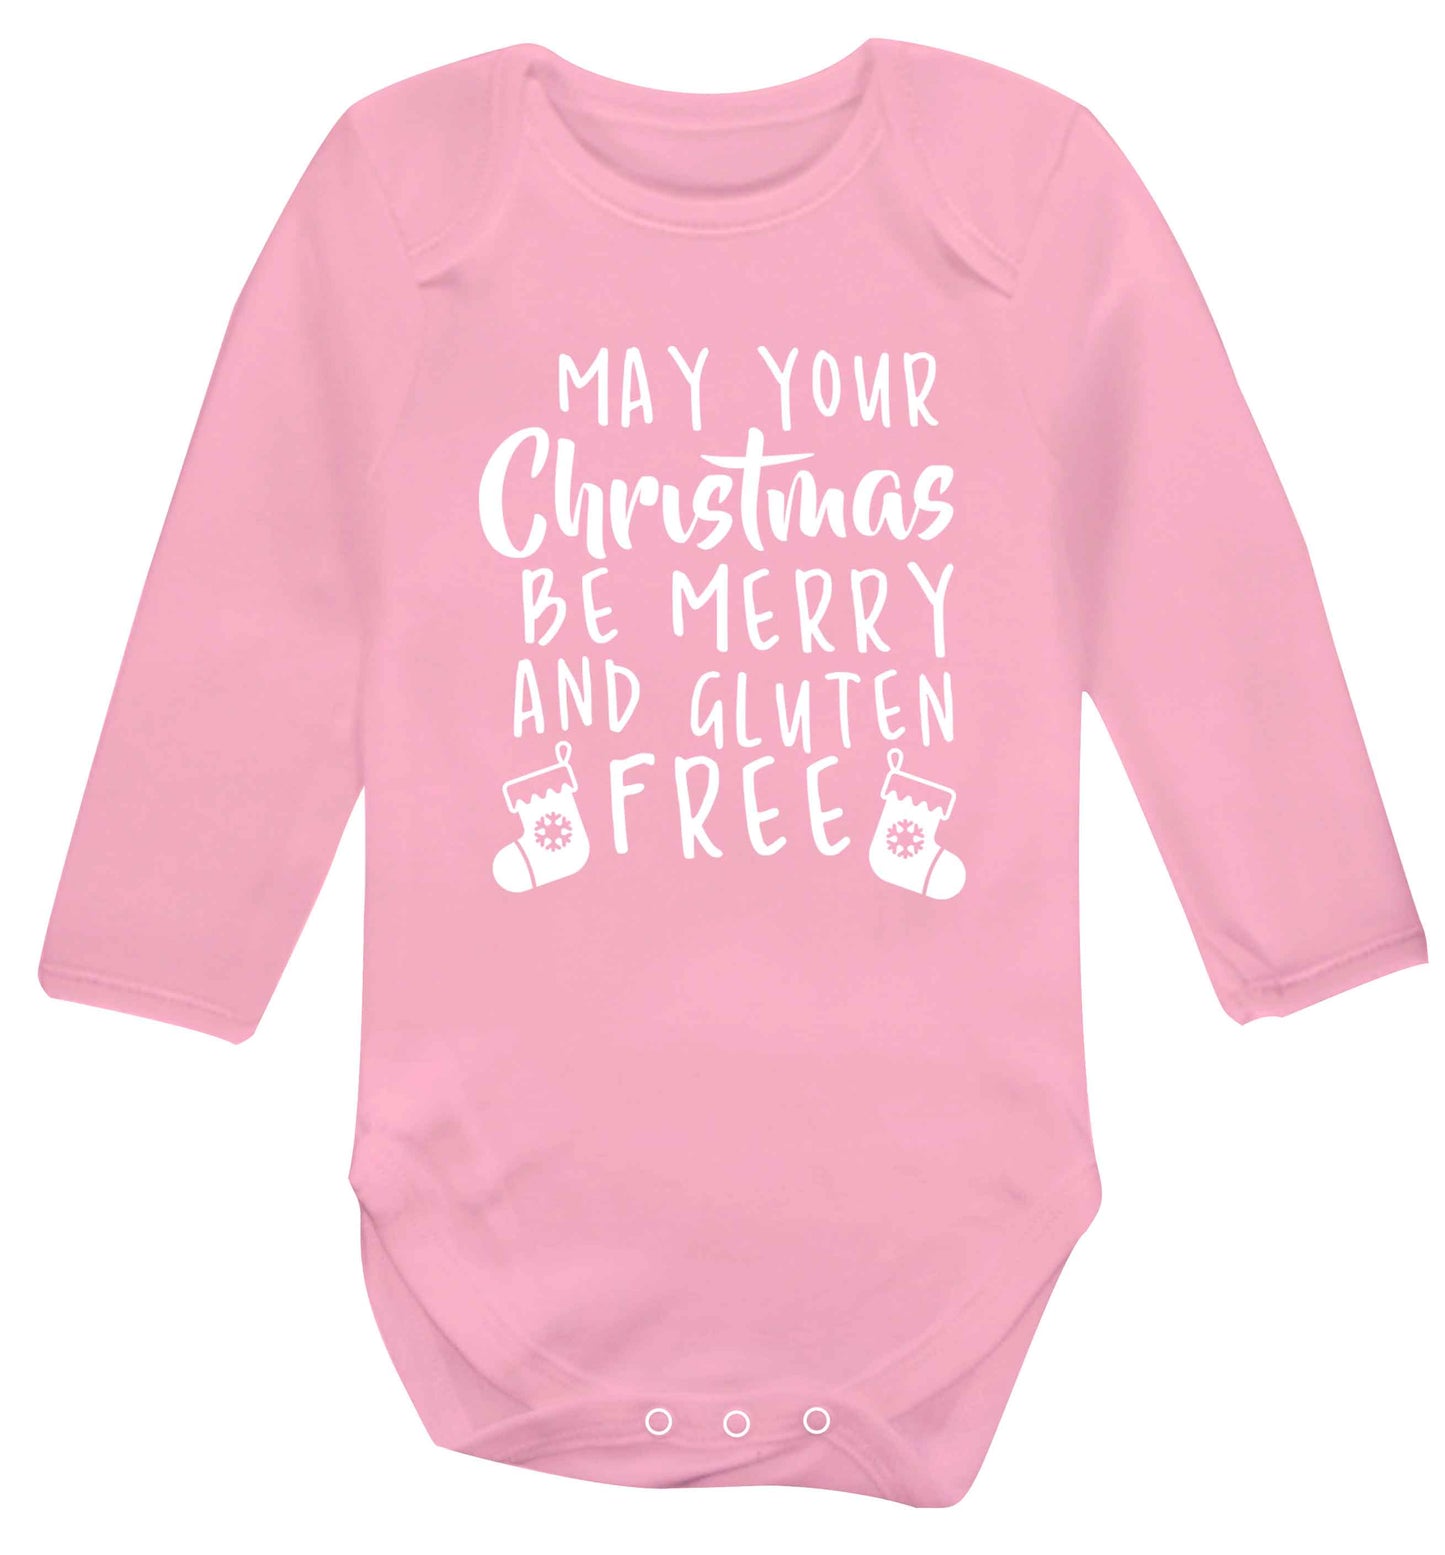 May your Christmas be merry and gluten free Baby Vest long sleeved pale pink 6-12 months